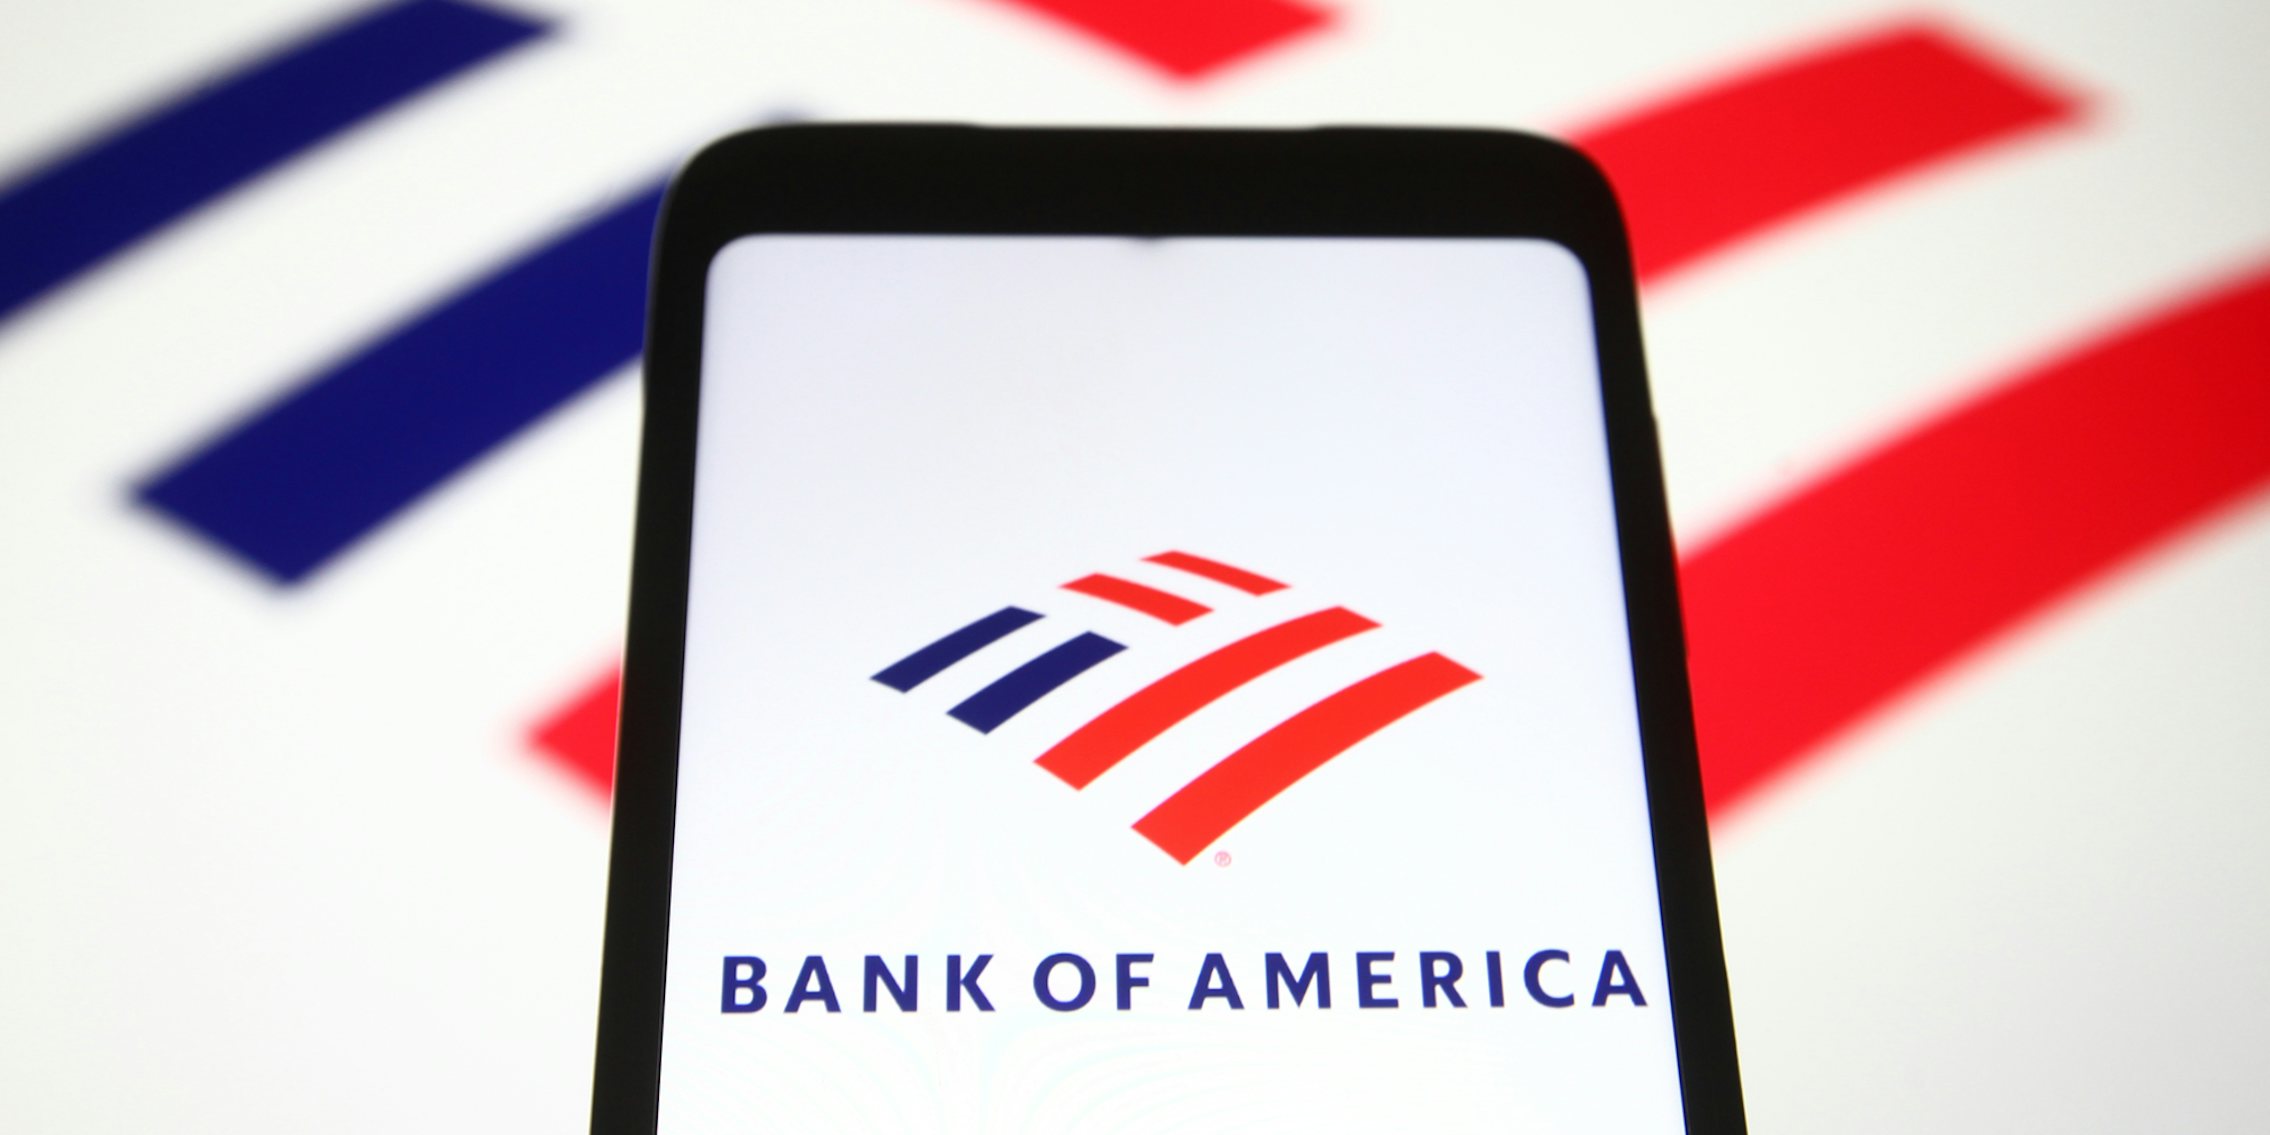 Bank of America on phone in front of Bank of America logo on white background